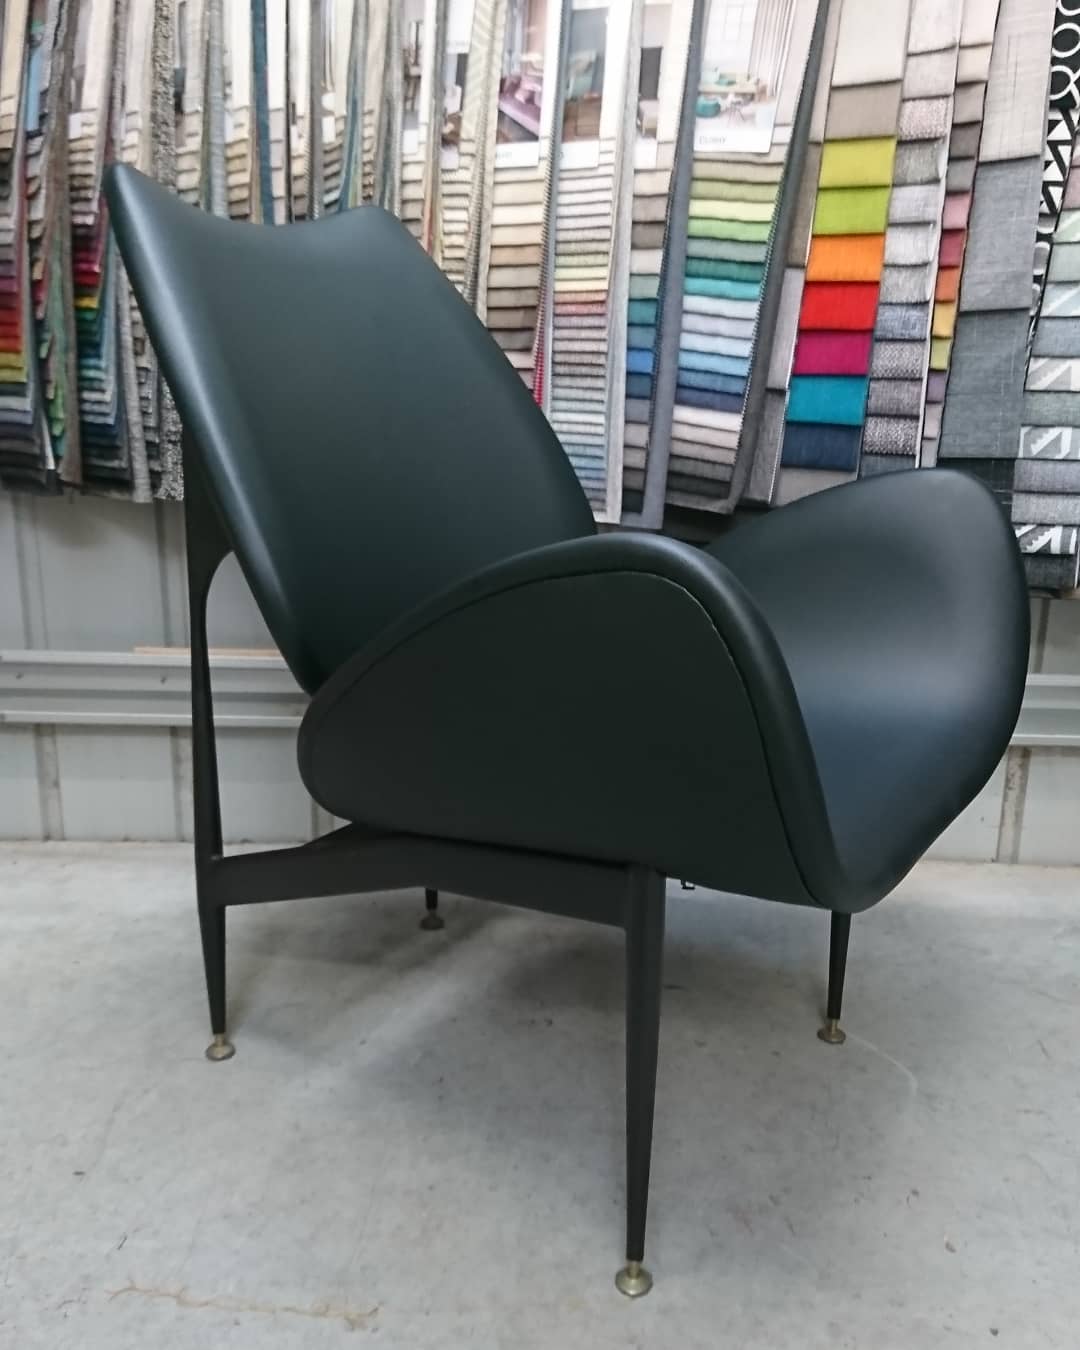 robert_langham_upholstery_Launceston Upholstery Grant Featherston Scape lounge chair